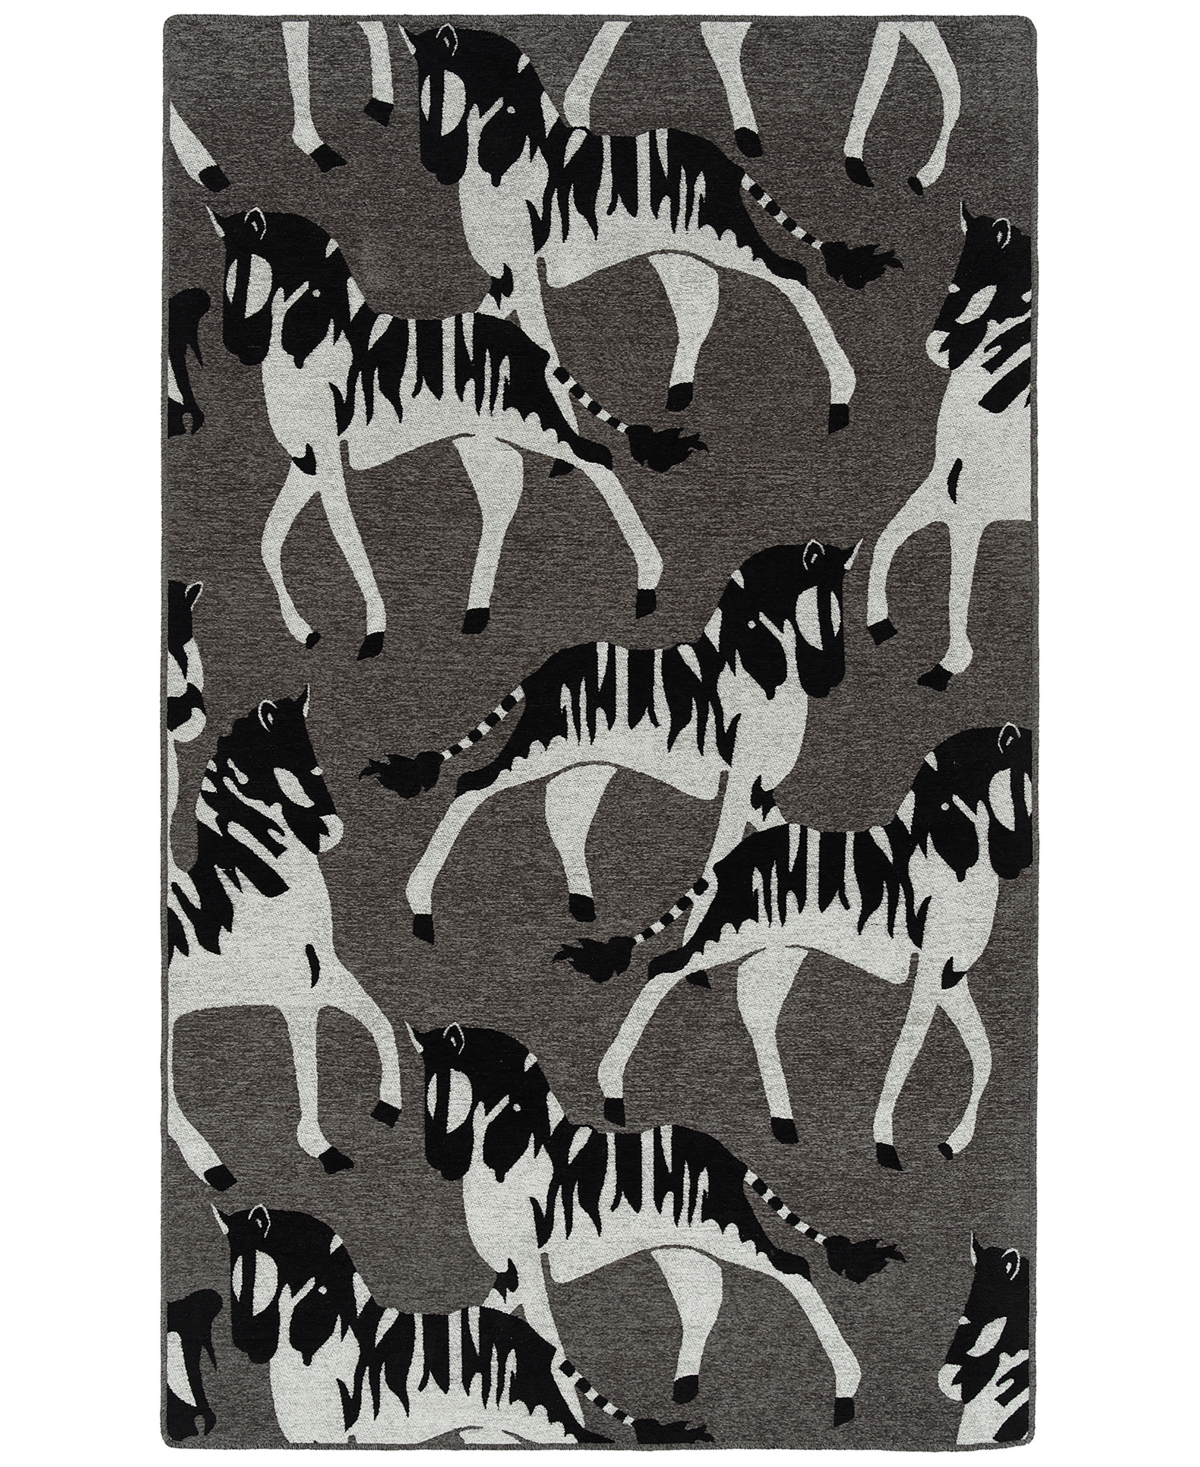 Hilary Farr Forever Fauna Hfa02-38 2' X 3' Area Rug In Charcoal